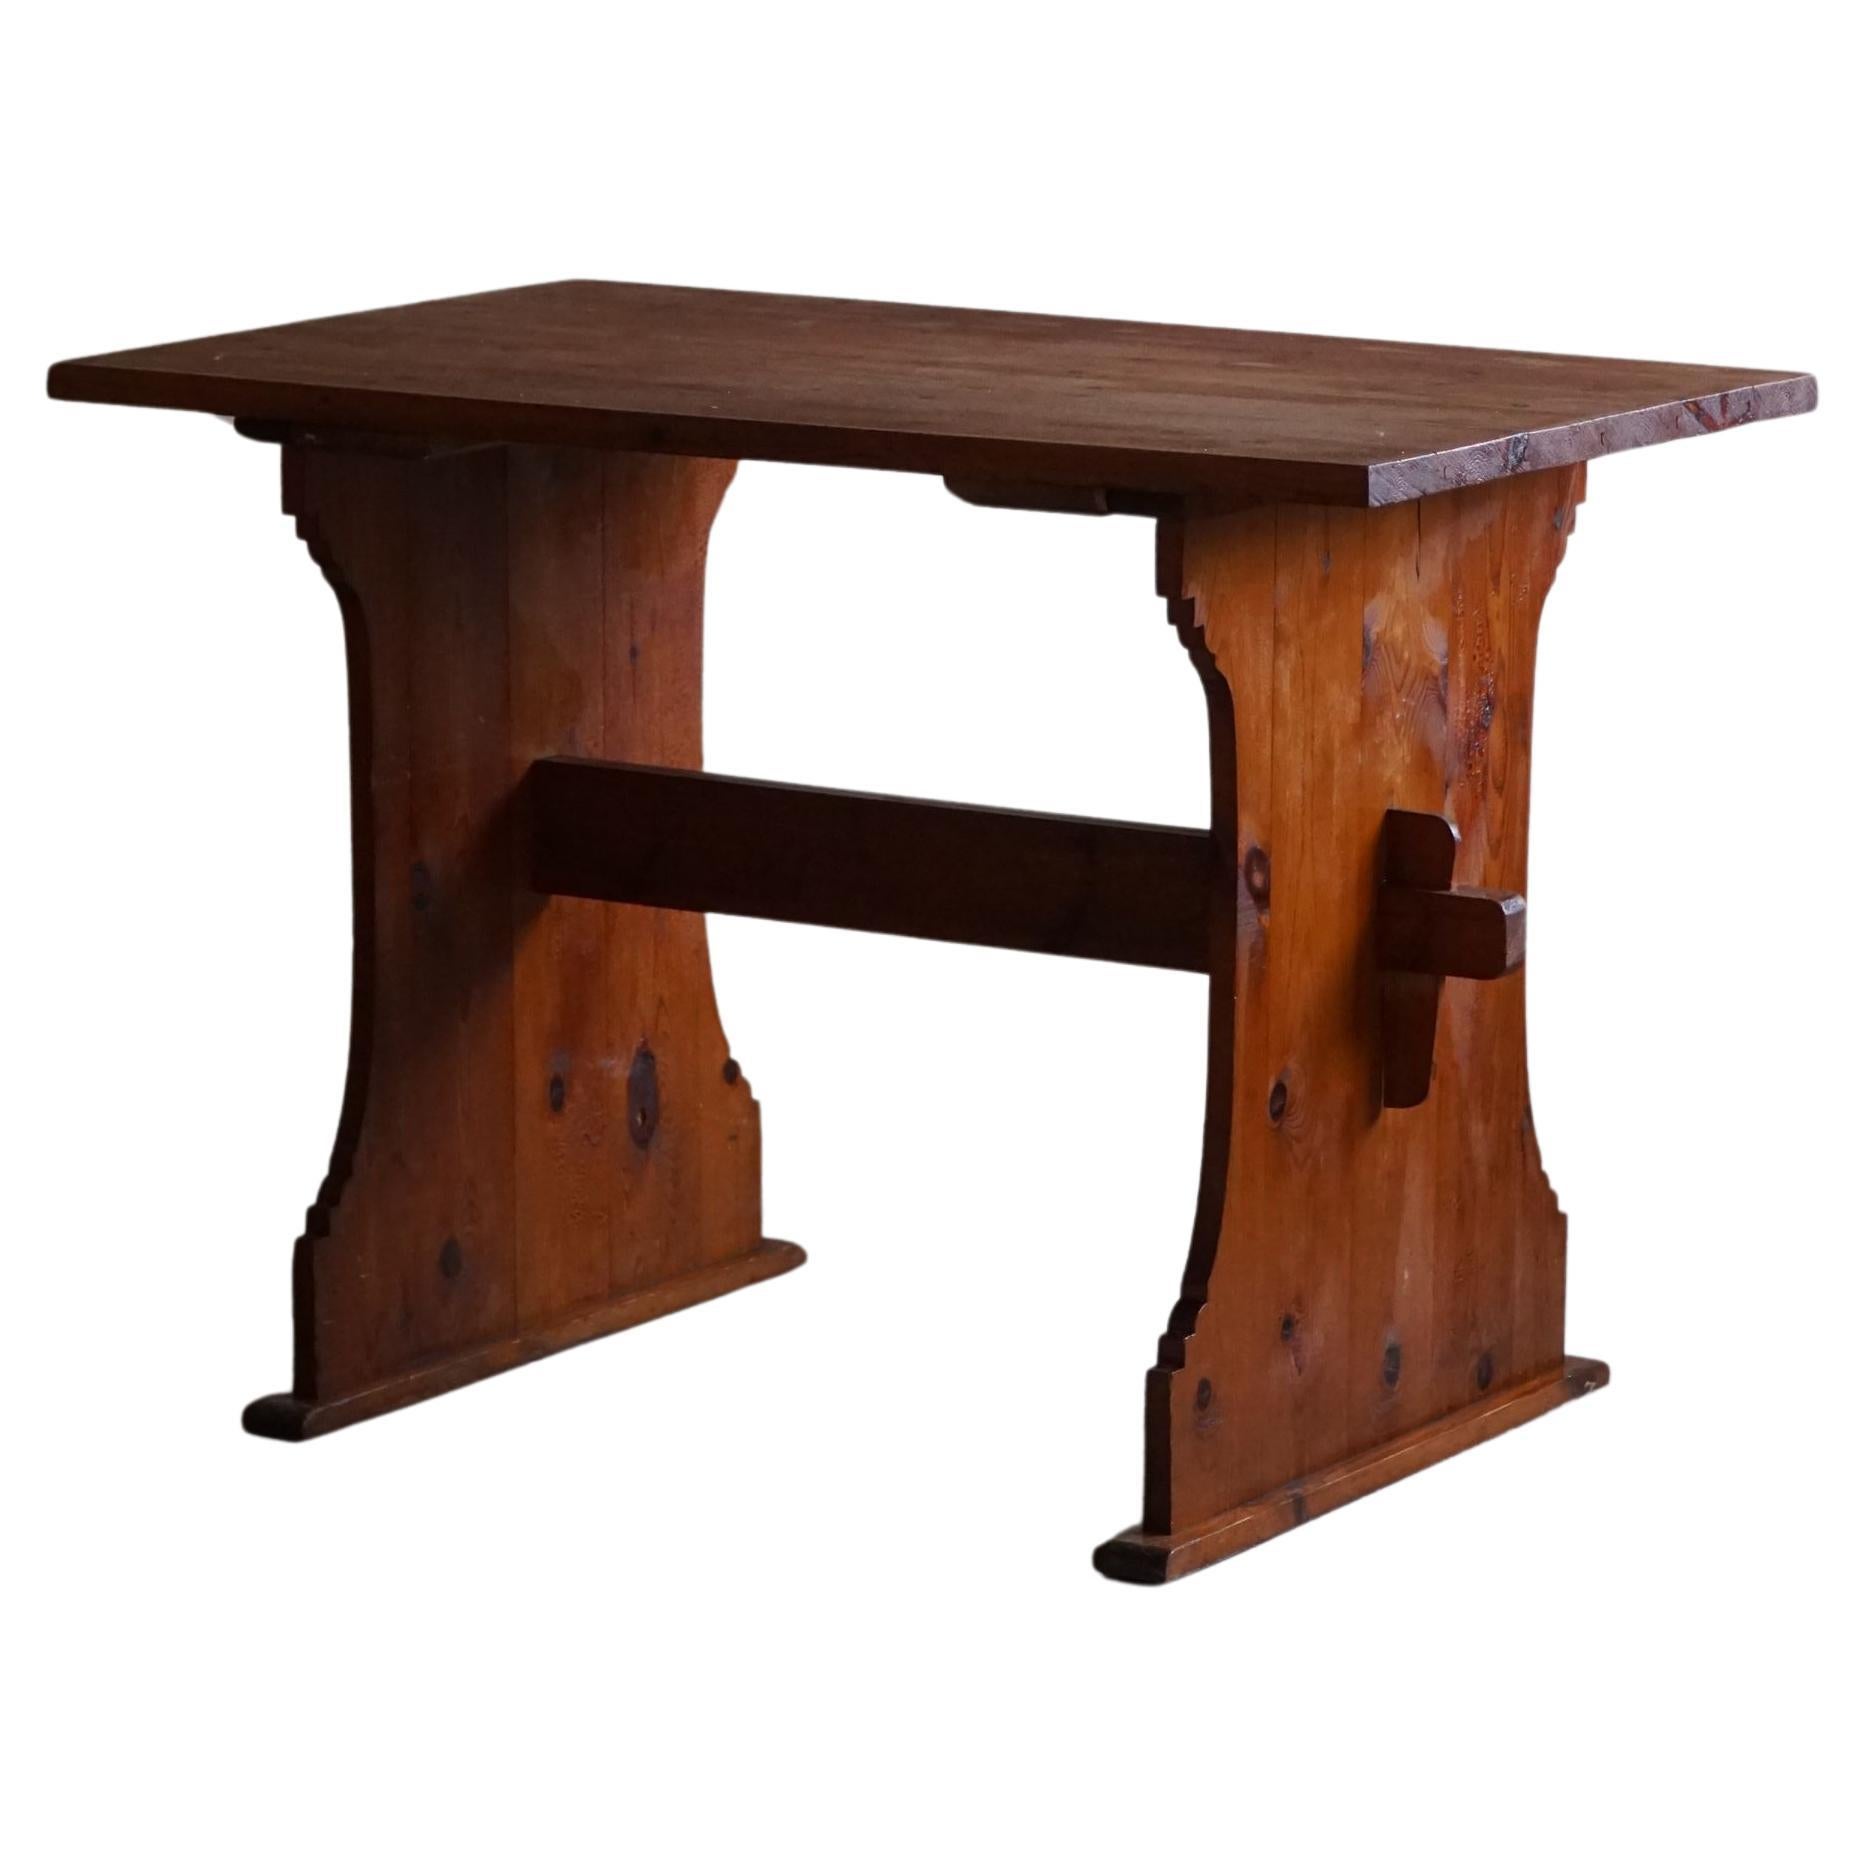 Swedish Modern Pine Desk, Axel Einar Hjorth Style, Made in the 1940s For Sale